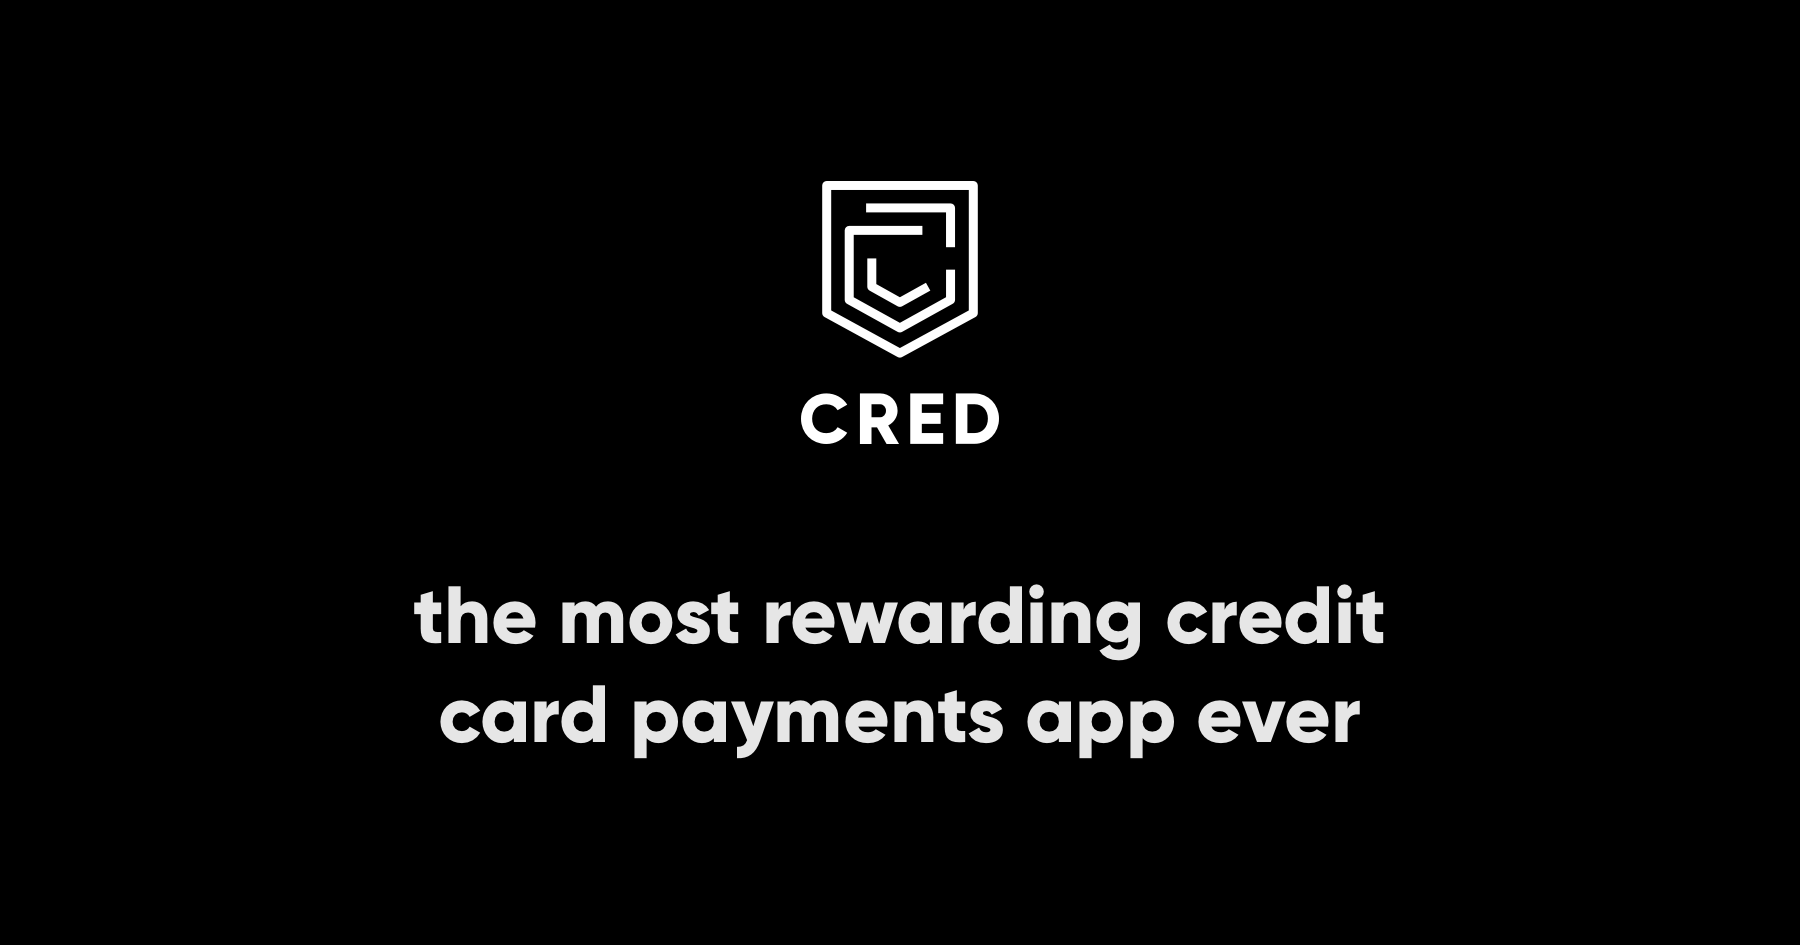 Cred - Pay Your Credit Card Bills & Earn Rewards